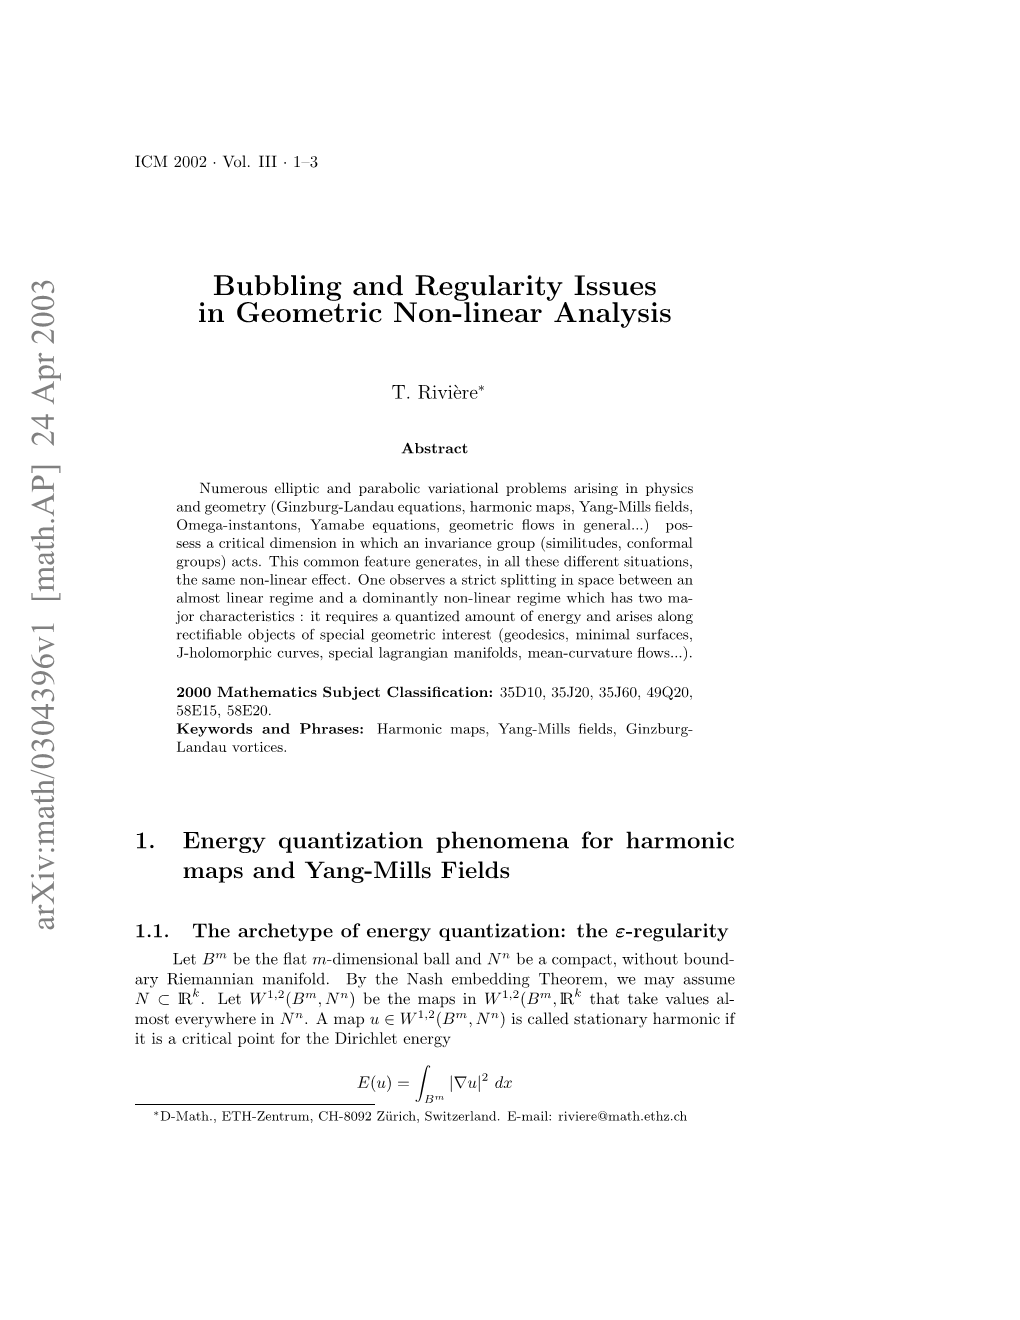 Bubbling and Regularity Issues in Geometric Non-Linear Analysis 199